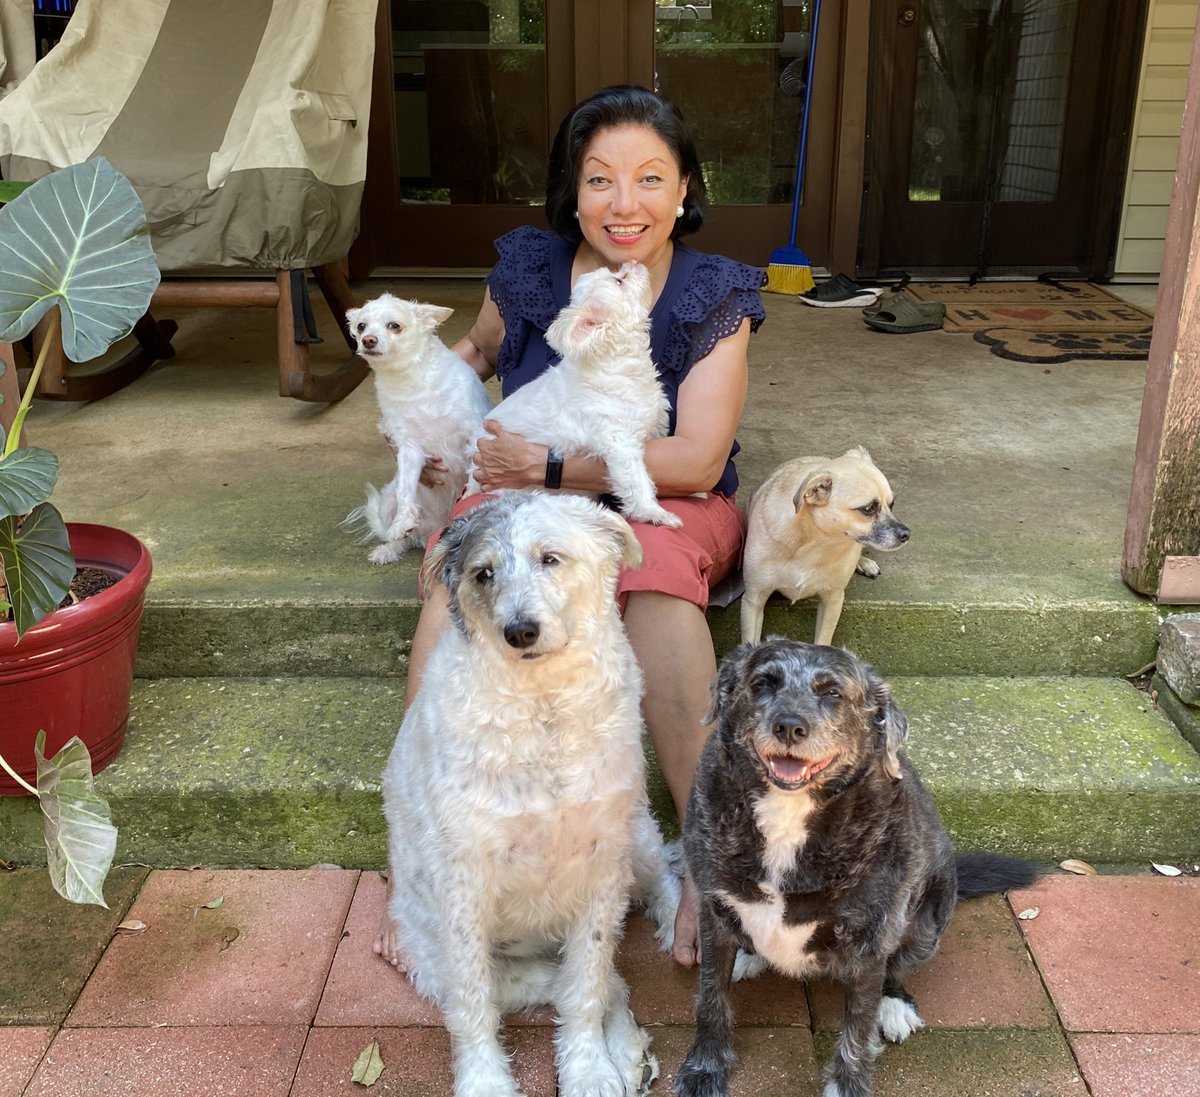 Today is National Rescue Dog Day. I have five of them. They are all loyal, loving, nonjudgmental, fun and get me out to walk. Please foster or adopt a dog from your local shelter. Save a life, #NationalRescueDogDay #Dogs #puppies #AdoptDontShop